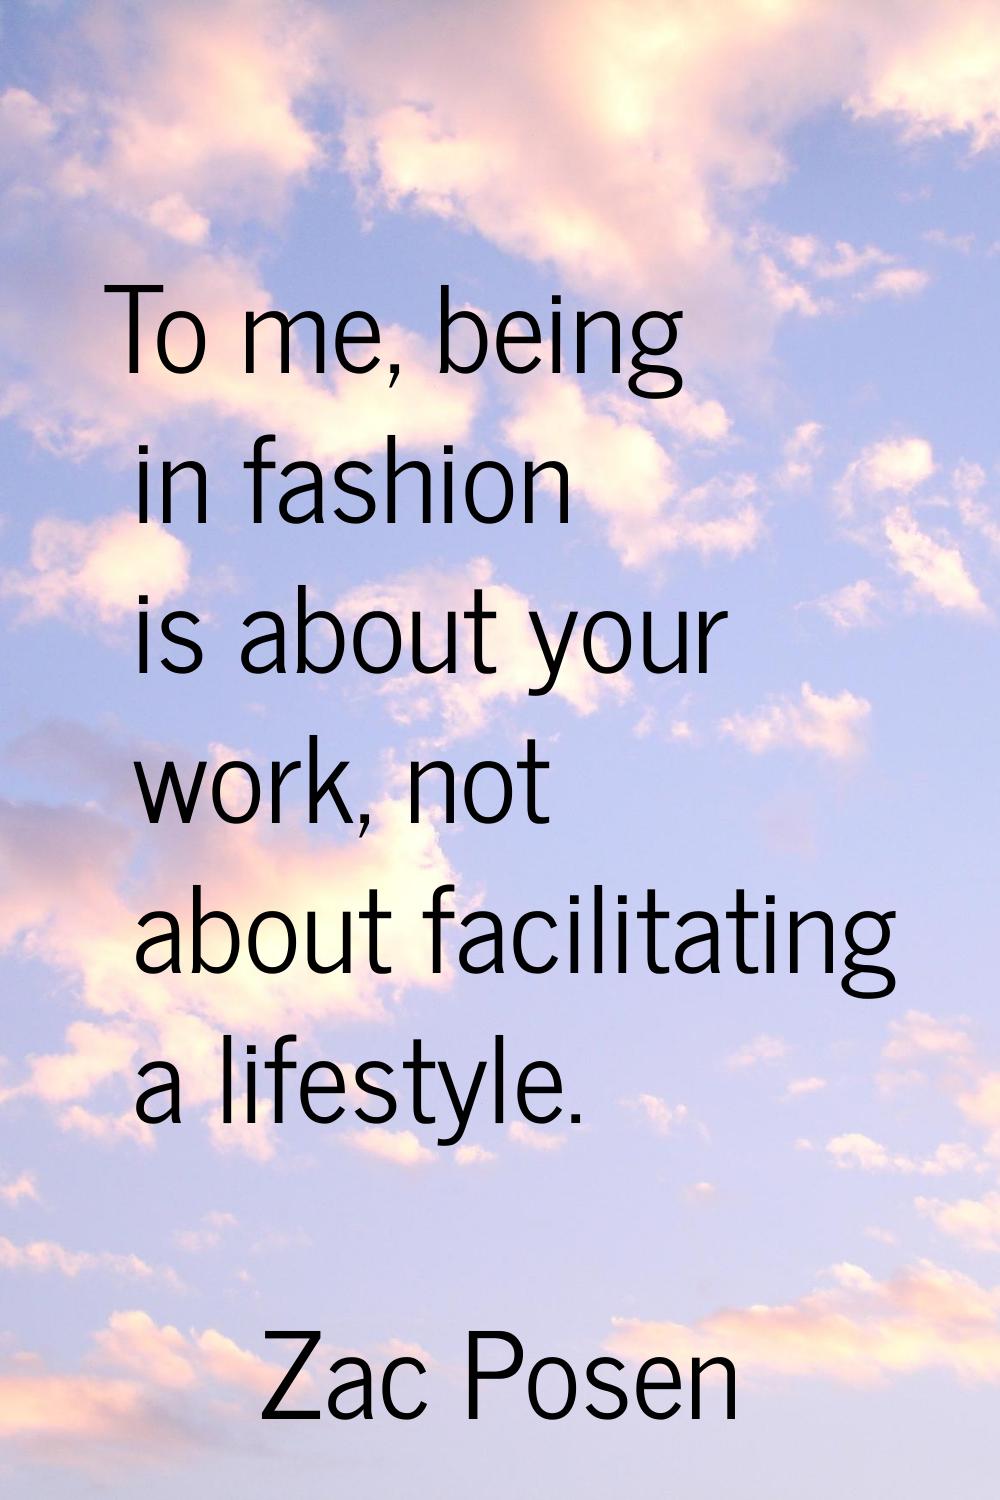 To me, being in fashion is about your work, not about facilitating a lifestyle.